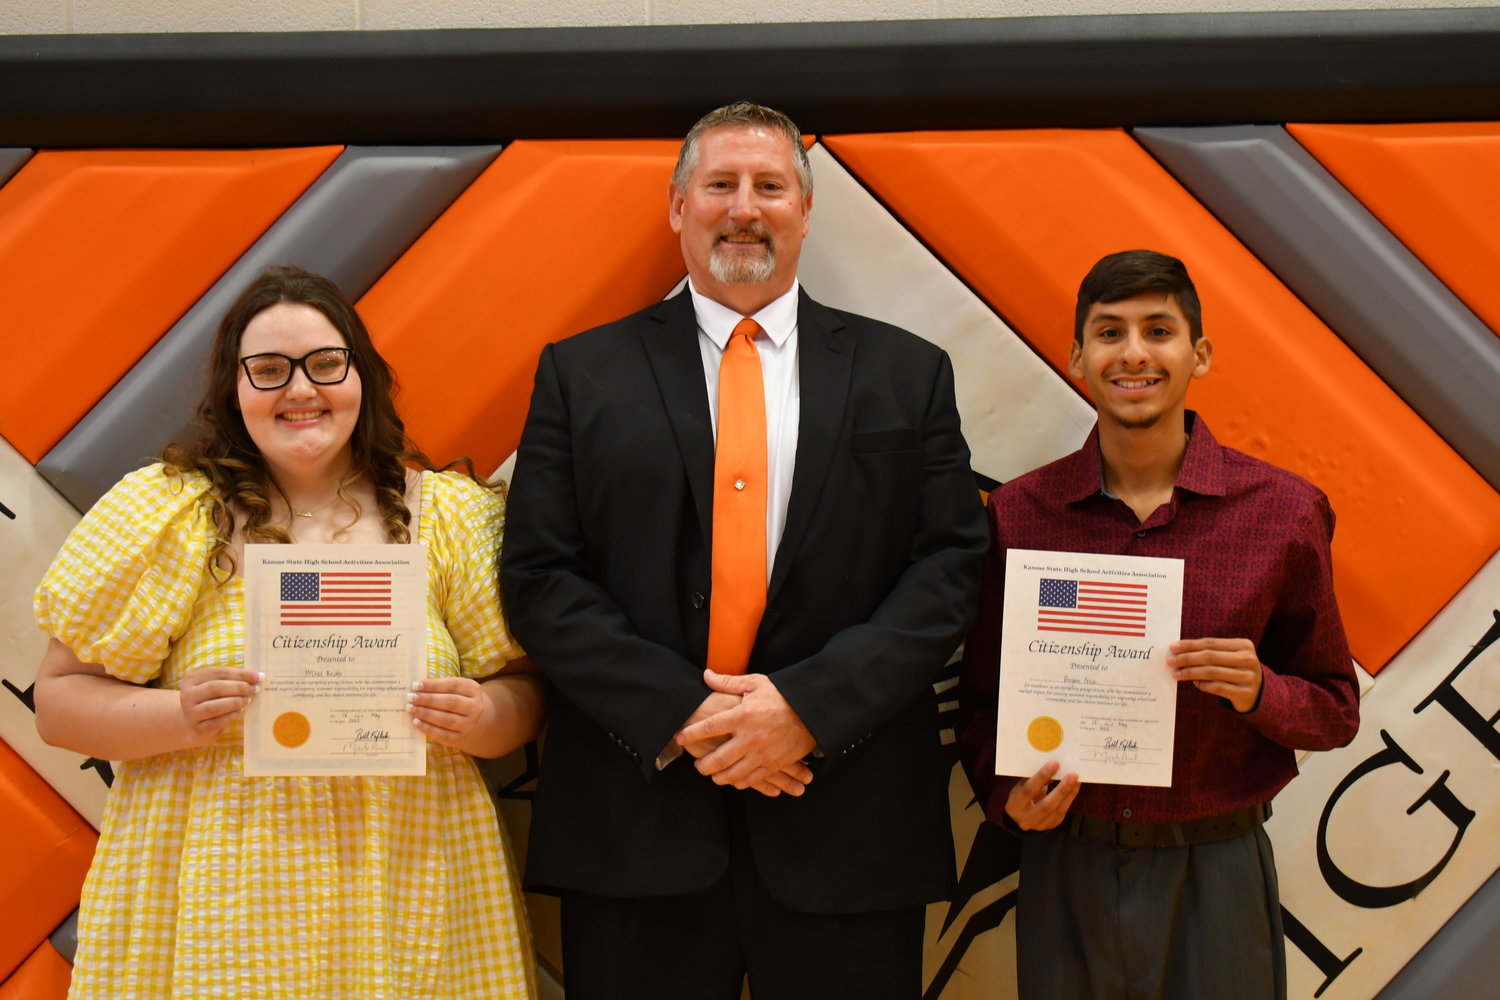 Senior Awards — McCrae Becker and Bryan Peña were given the Kansas State High School Activities Association, Inc. Scholarship from Mark Paul on Friday, May 13, 2022.